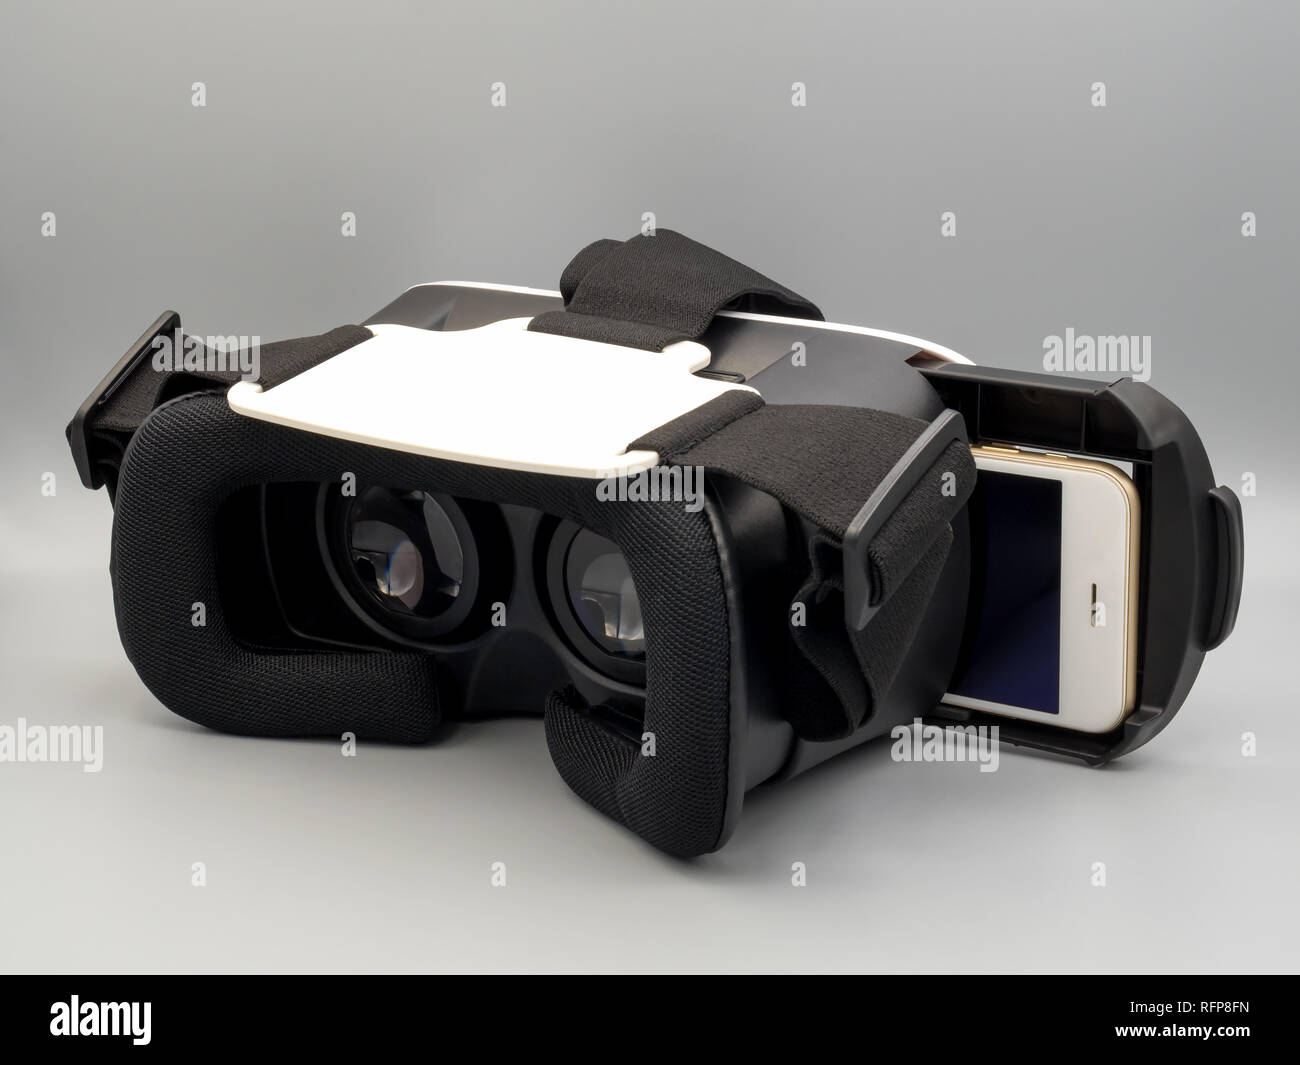 Packshot image of smartphone and virtual reality headset (VR Box) on gray background Stock Photo